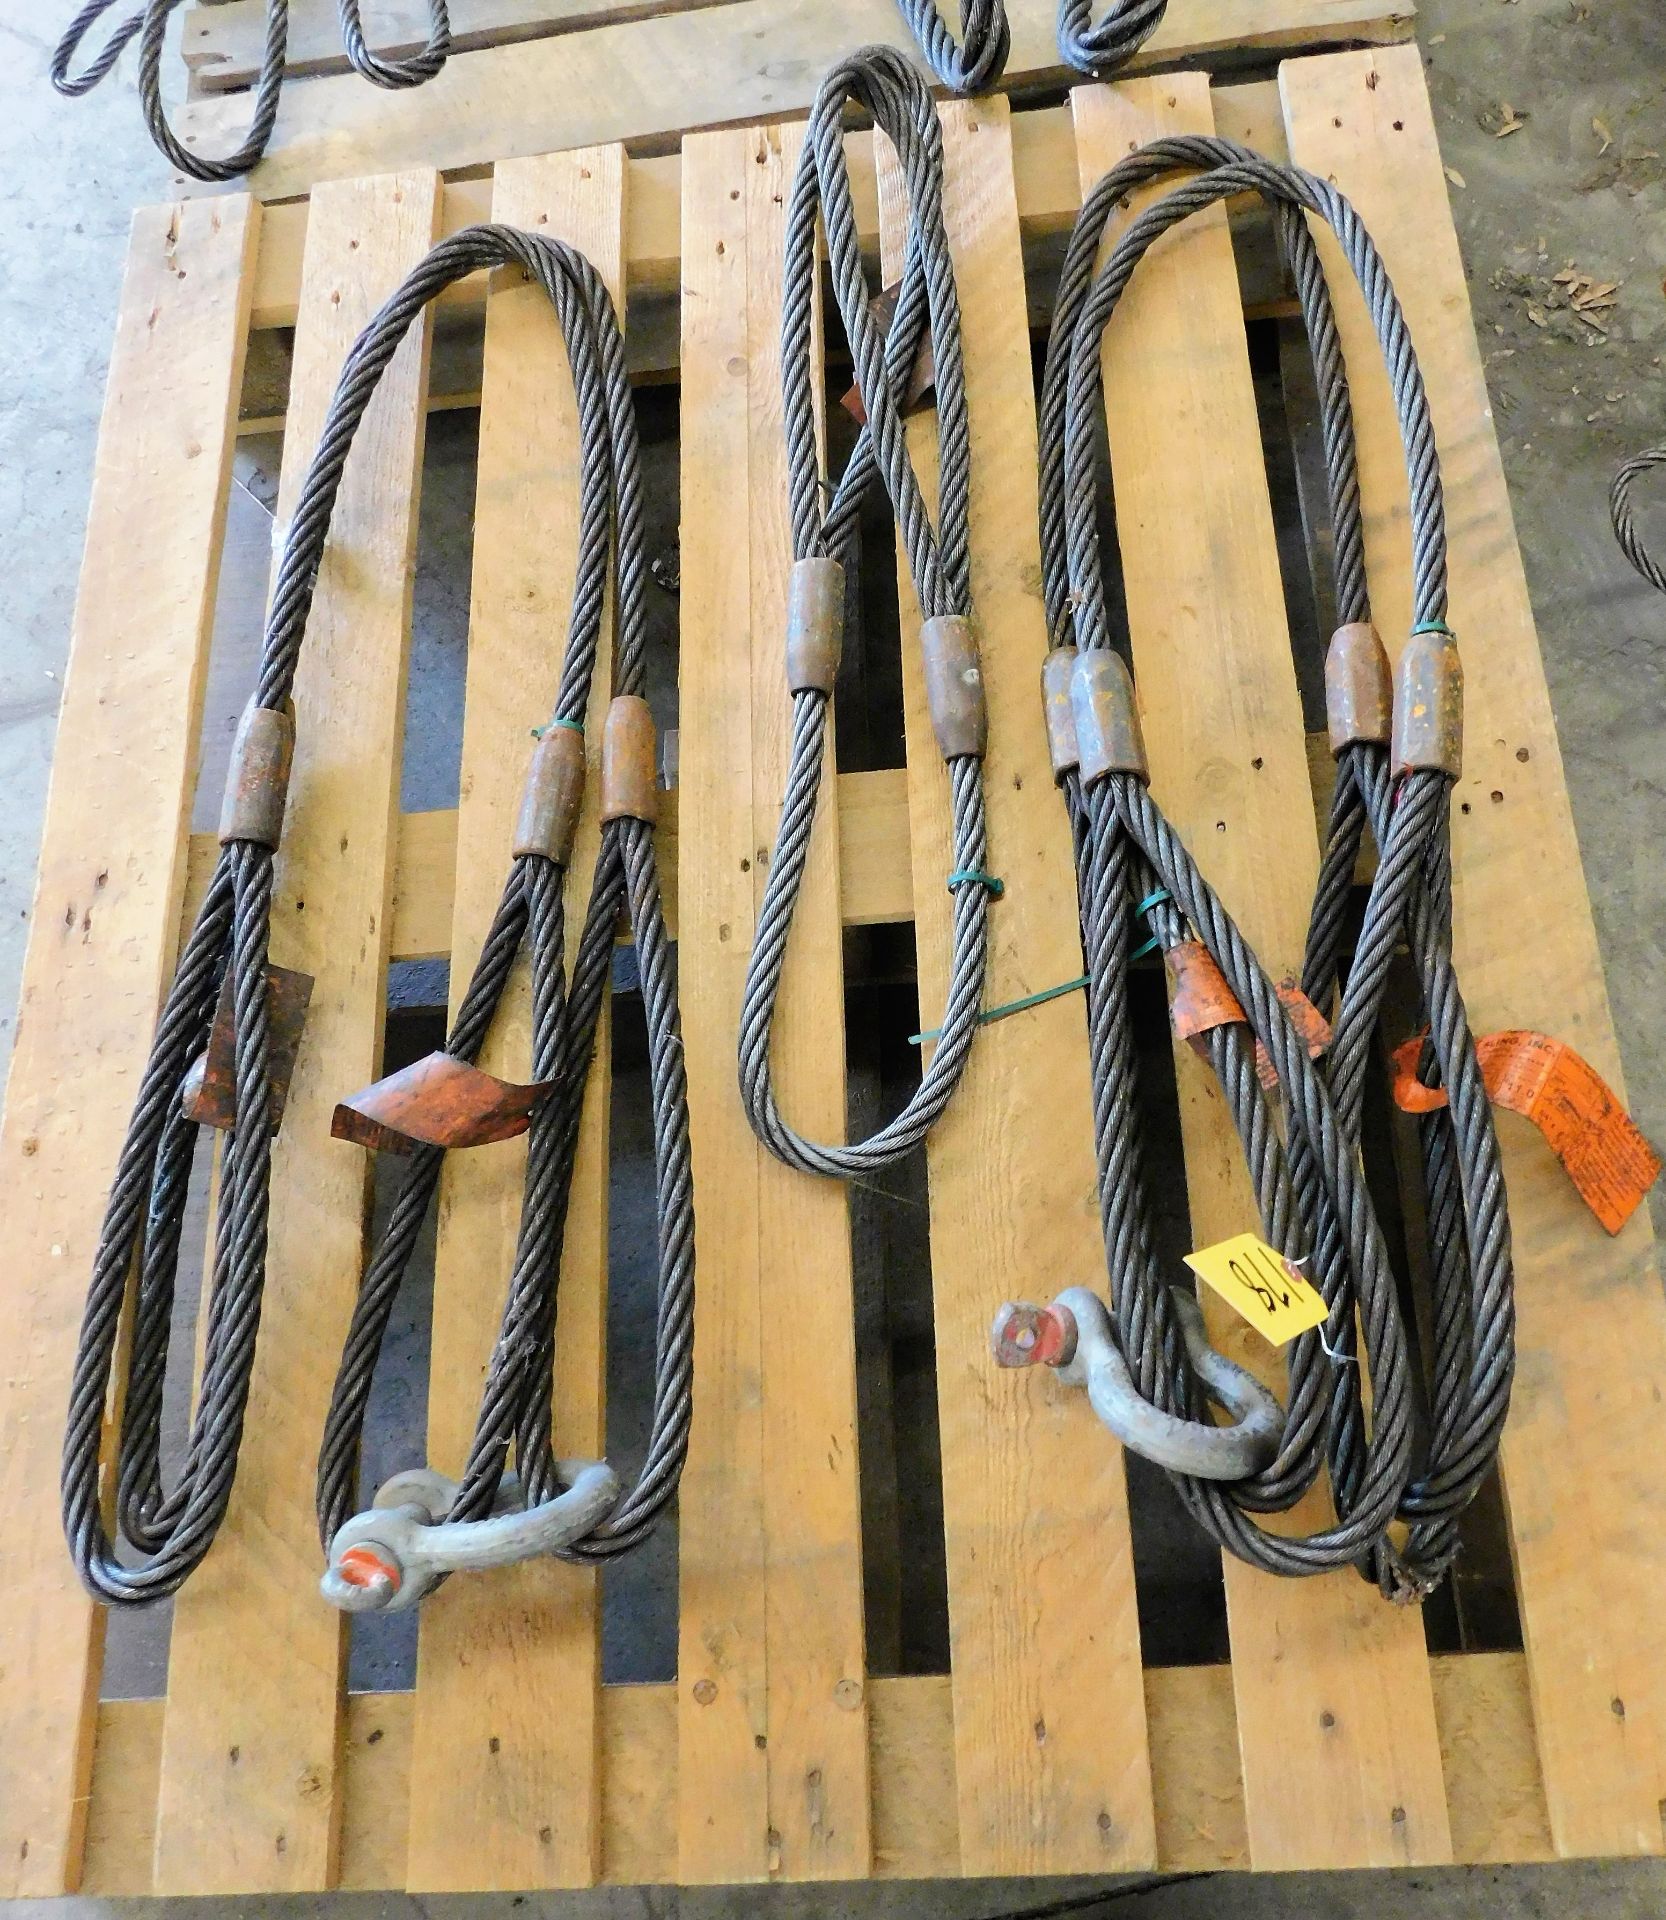 CABLE SLINGS